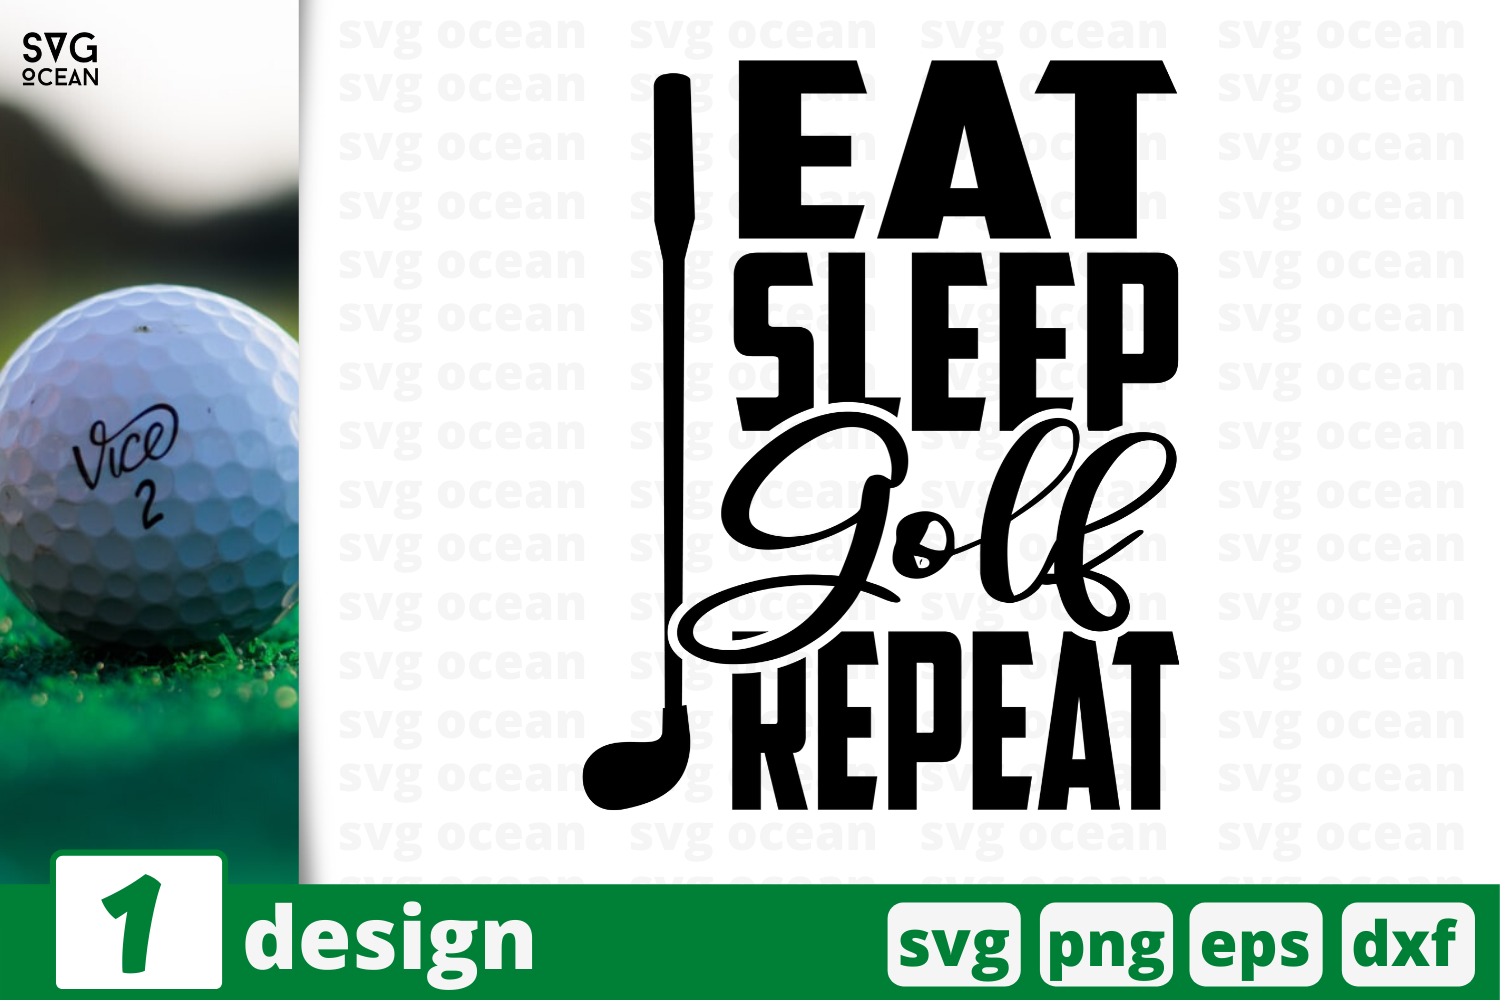 Download 1 Eat Sleep Golf Repeat Sport Quotes Cricut Svg By Svgocean Thehungryjpeg Com SVG, PNG, EPS, DXF File